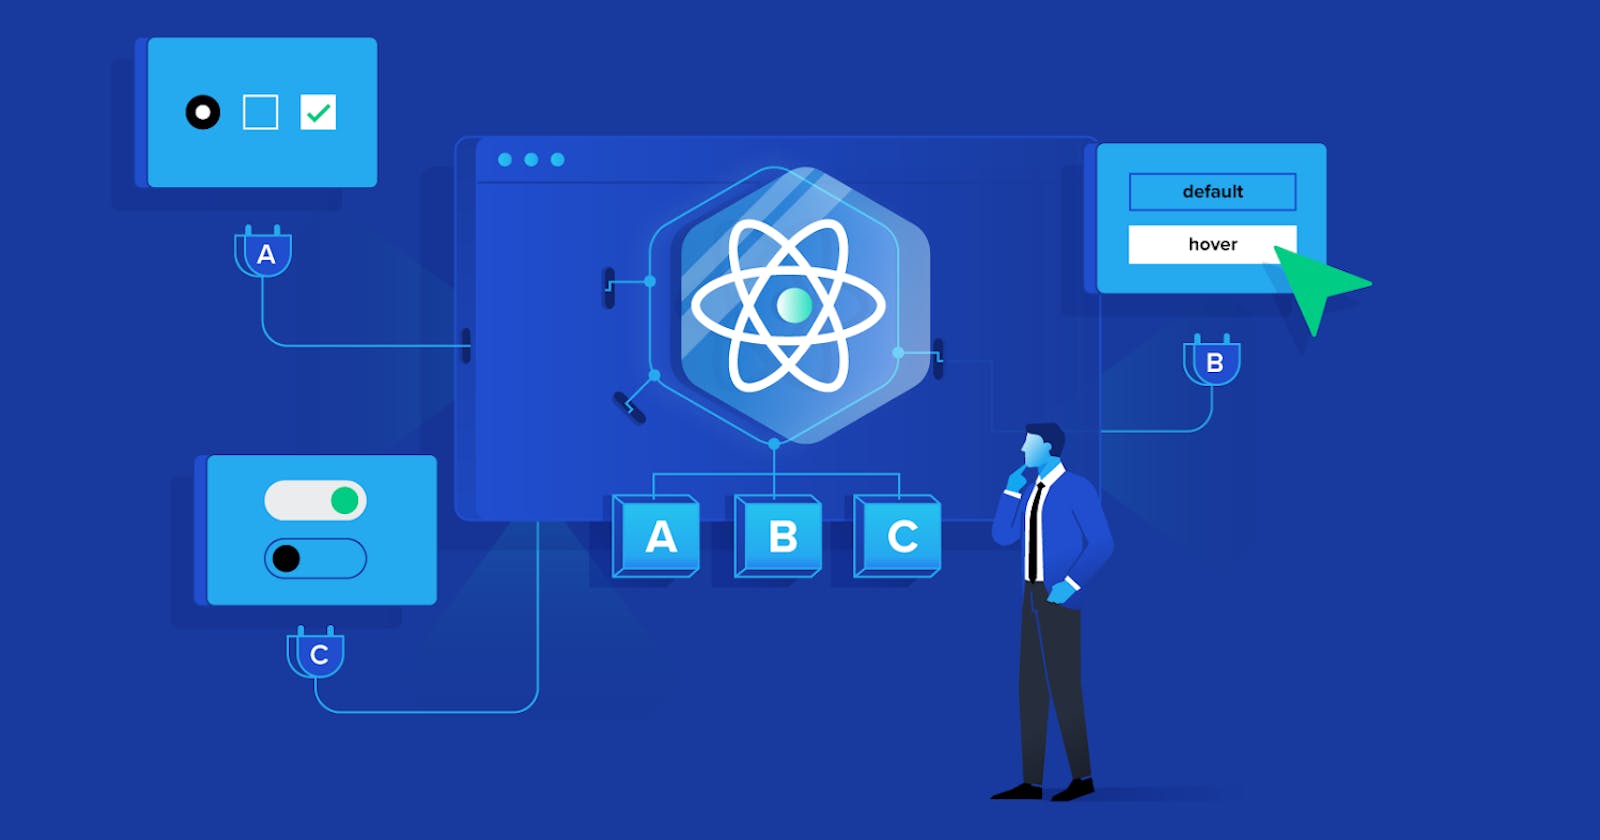 Mastering State Management in React